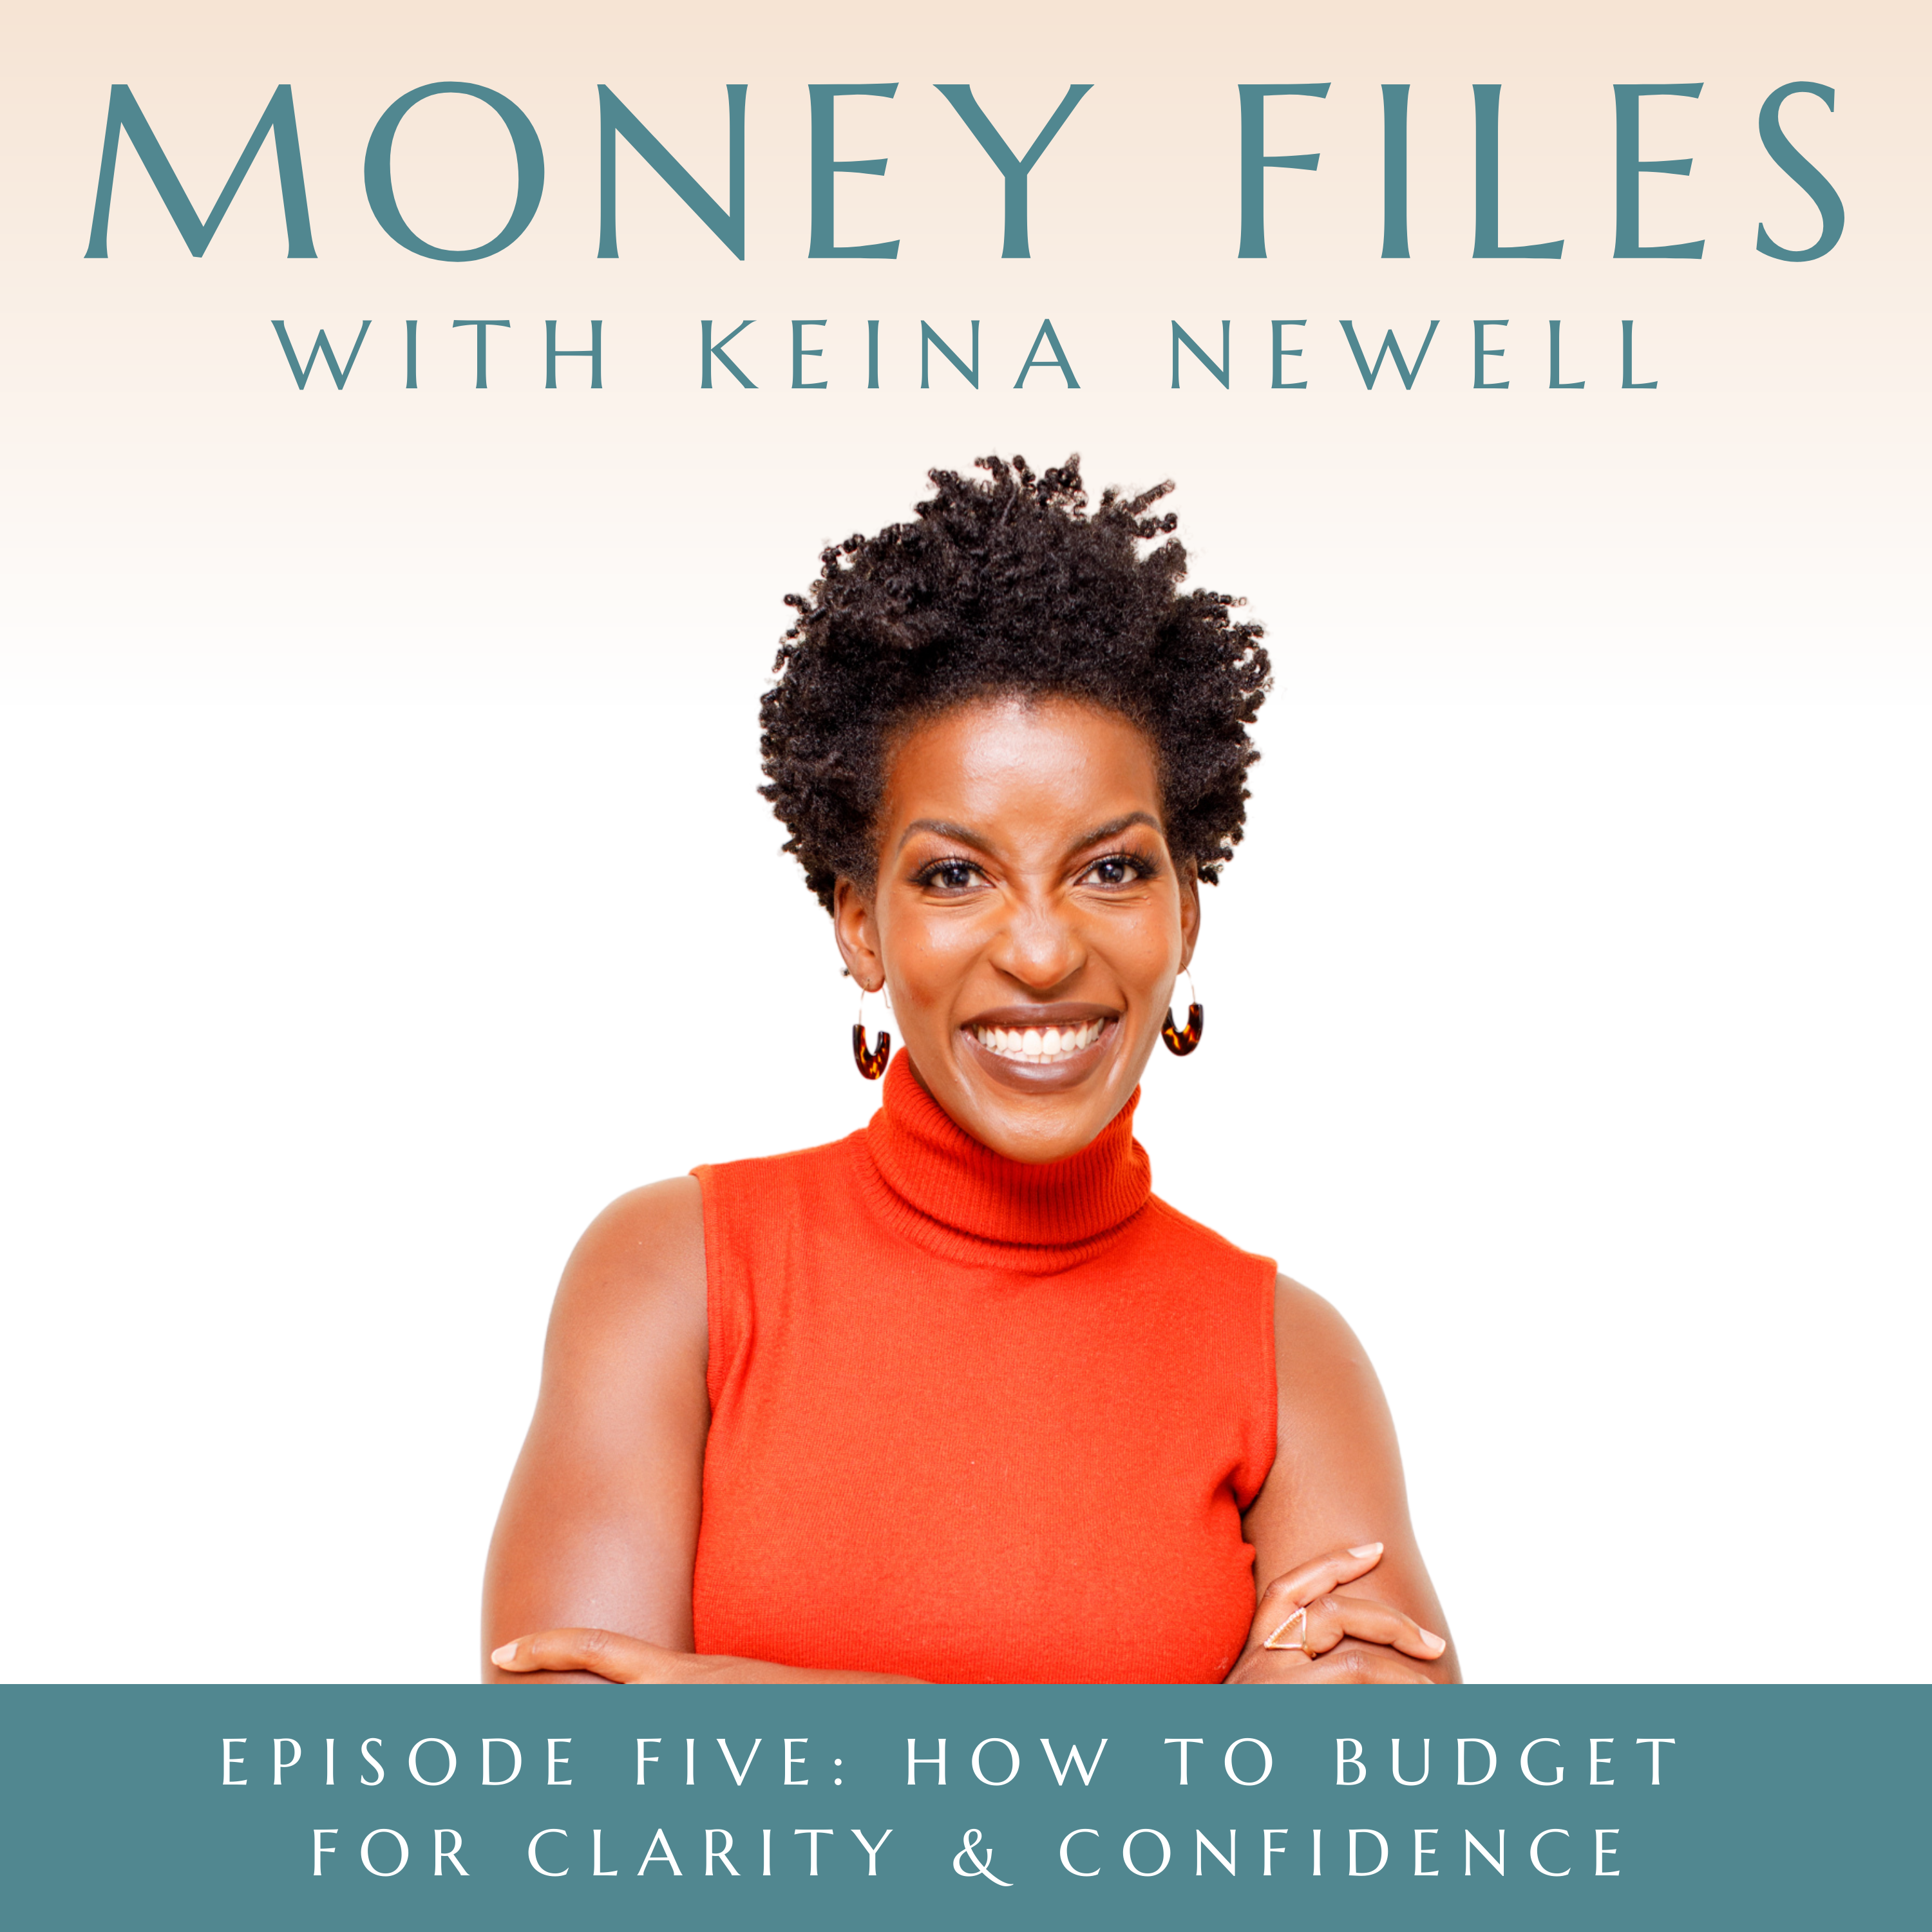 How to Budget for Clarity & Confidence